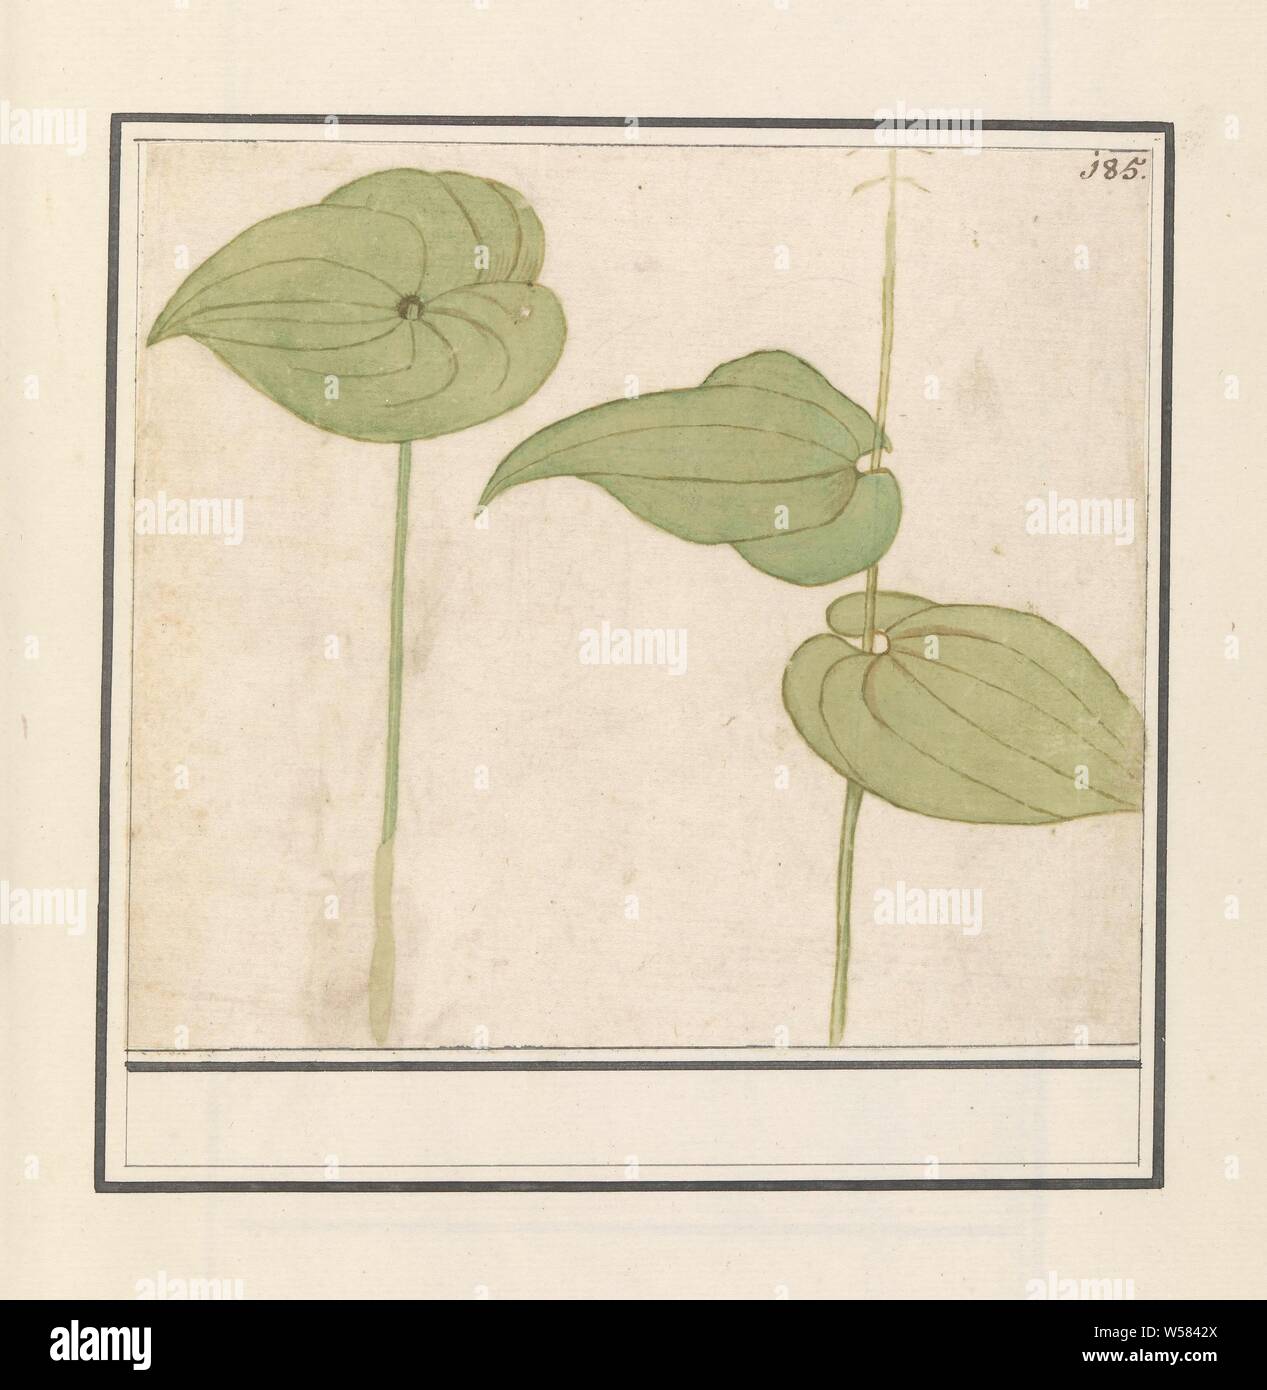 Plant (unknown species), leaves of an unknown plant, possibly of a water lily. Numbered top right: 185. Part of the second album with drawings of flowers and plants. Ninth of twelve albums with drawings of animals, birds and plants known around 1600, commissioned by Emperor Rudolf II. With explanation in Dutch, Latin and French., Plants and herbs, flowers: water-lily, Anselmus Boetius de Boodt, 1596 - 1610, paper, watercolor (paint), deck paint, chalk, pen, h 167 mm × w 190 mm Stock Photo